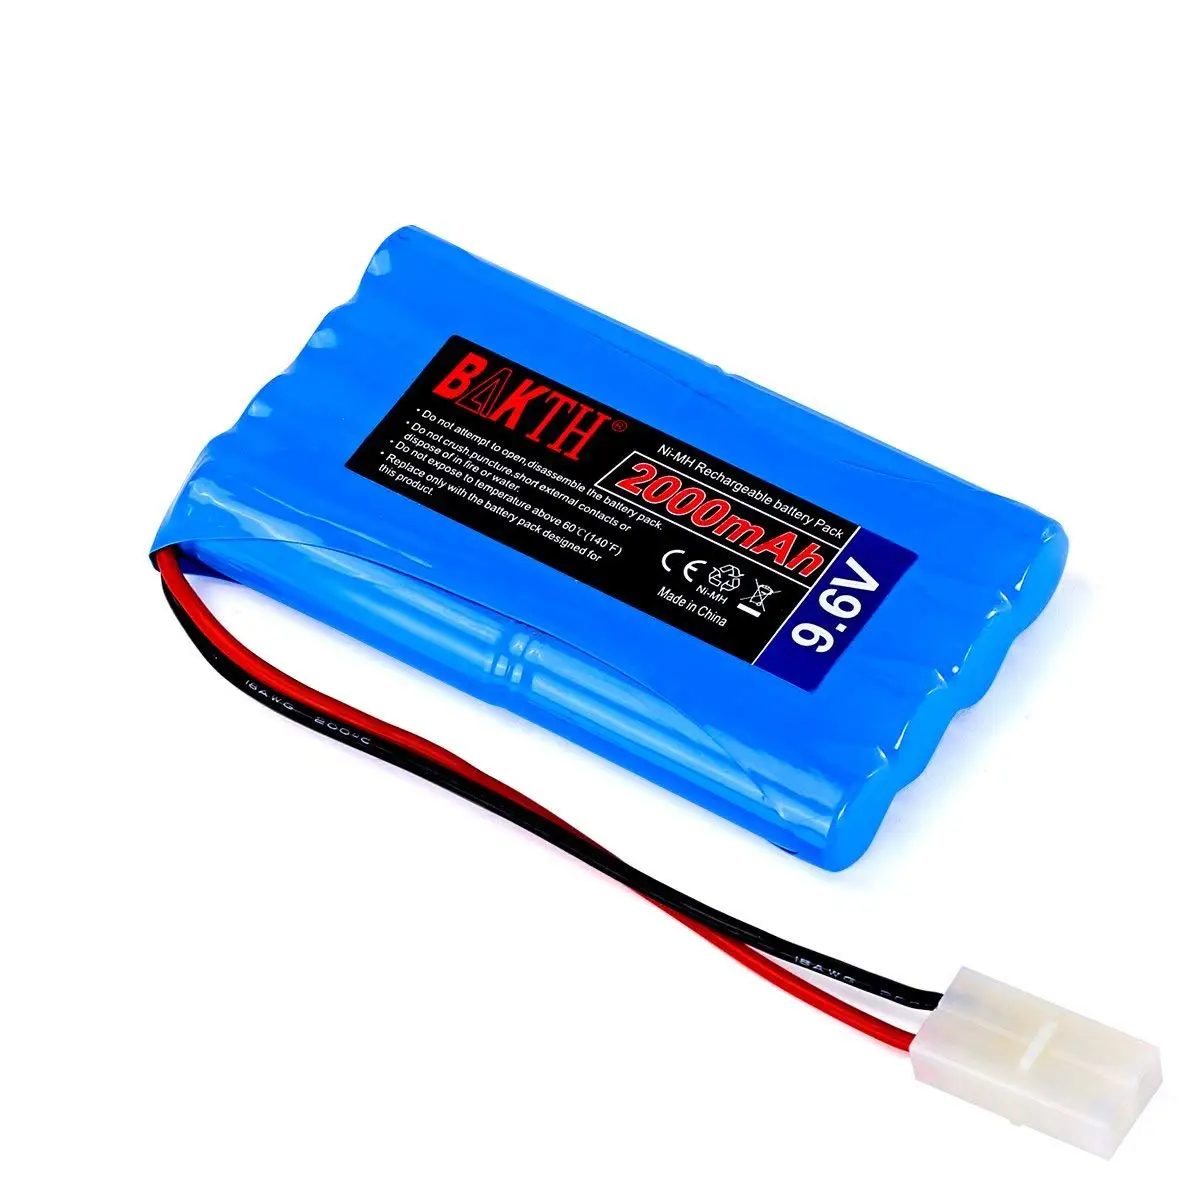 2000mah 9.6 v nimh rc car battery pack with charger